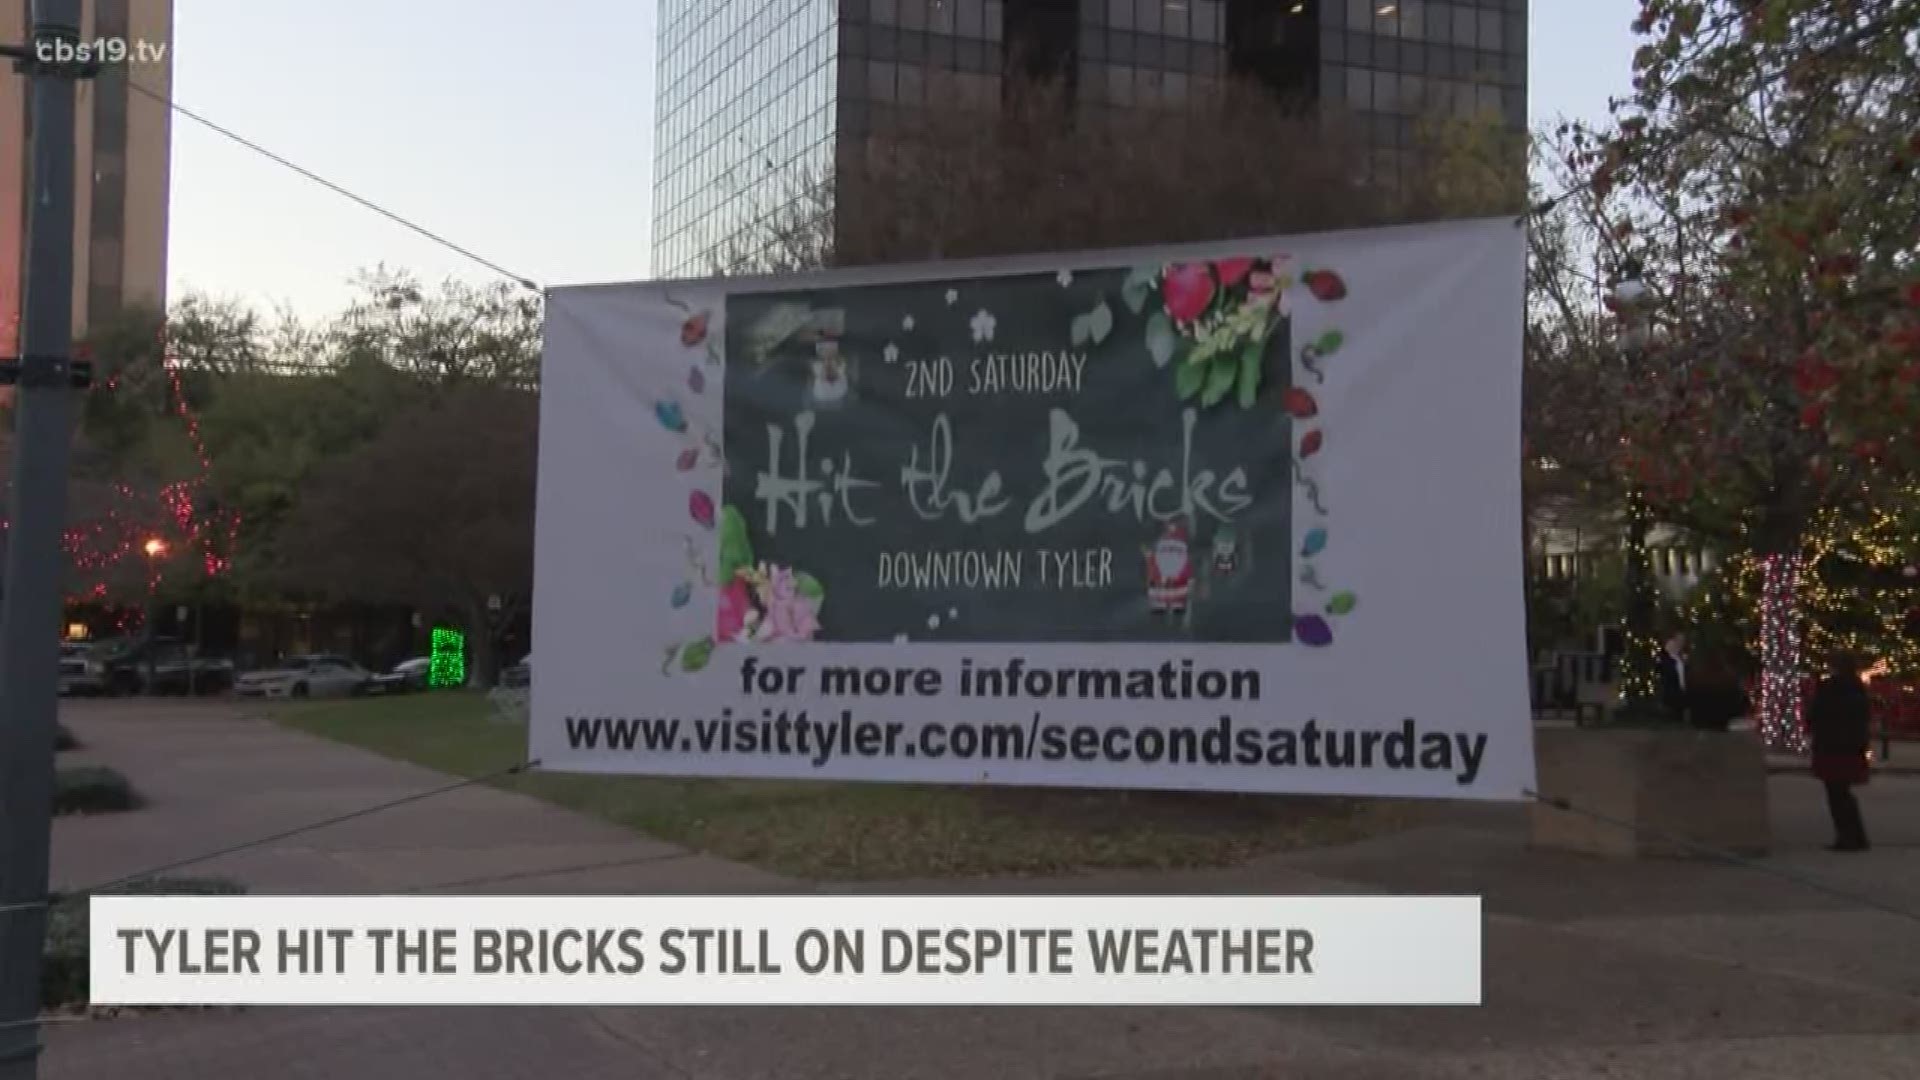 With severe weather in the forecast for Friday, the City of Tyler says the weather should not disrupt this weekend’s Hit the Bricks event.